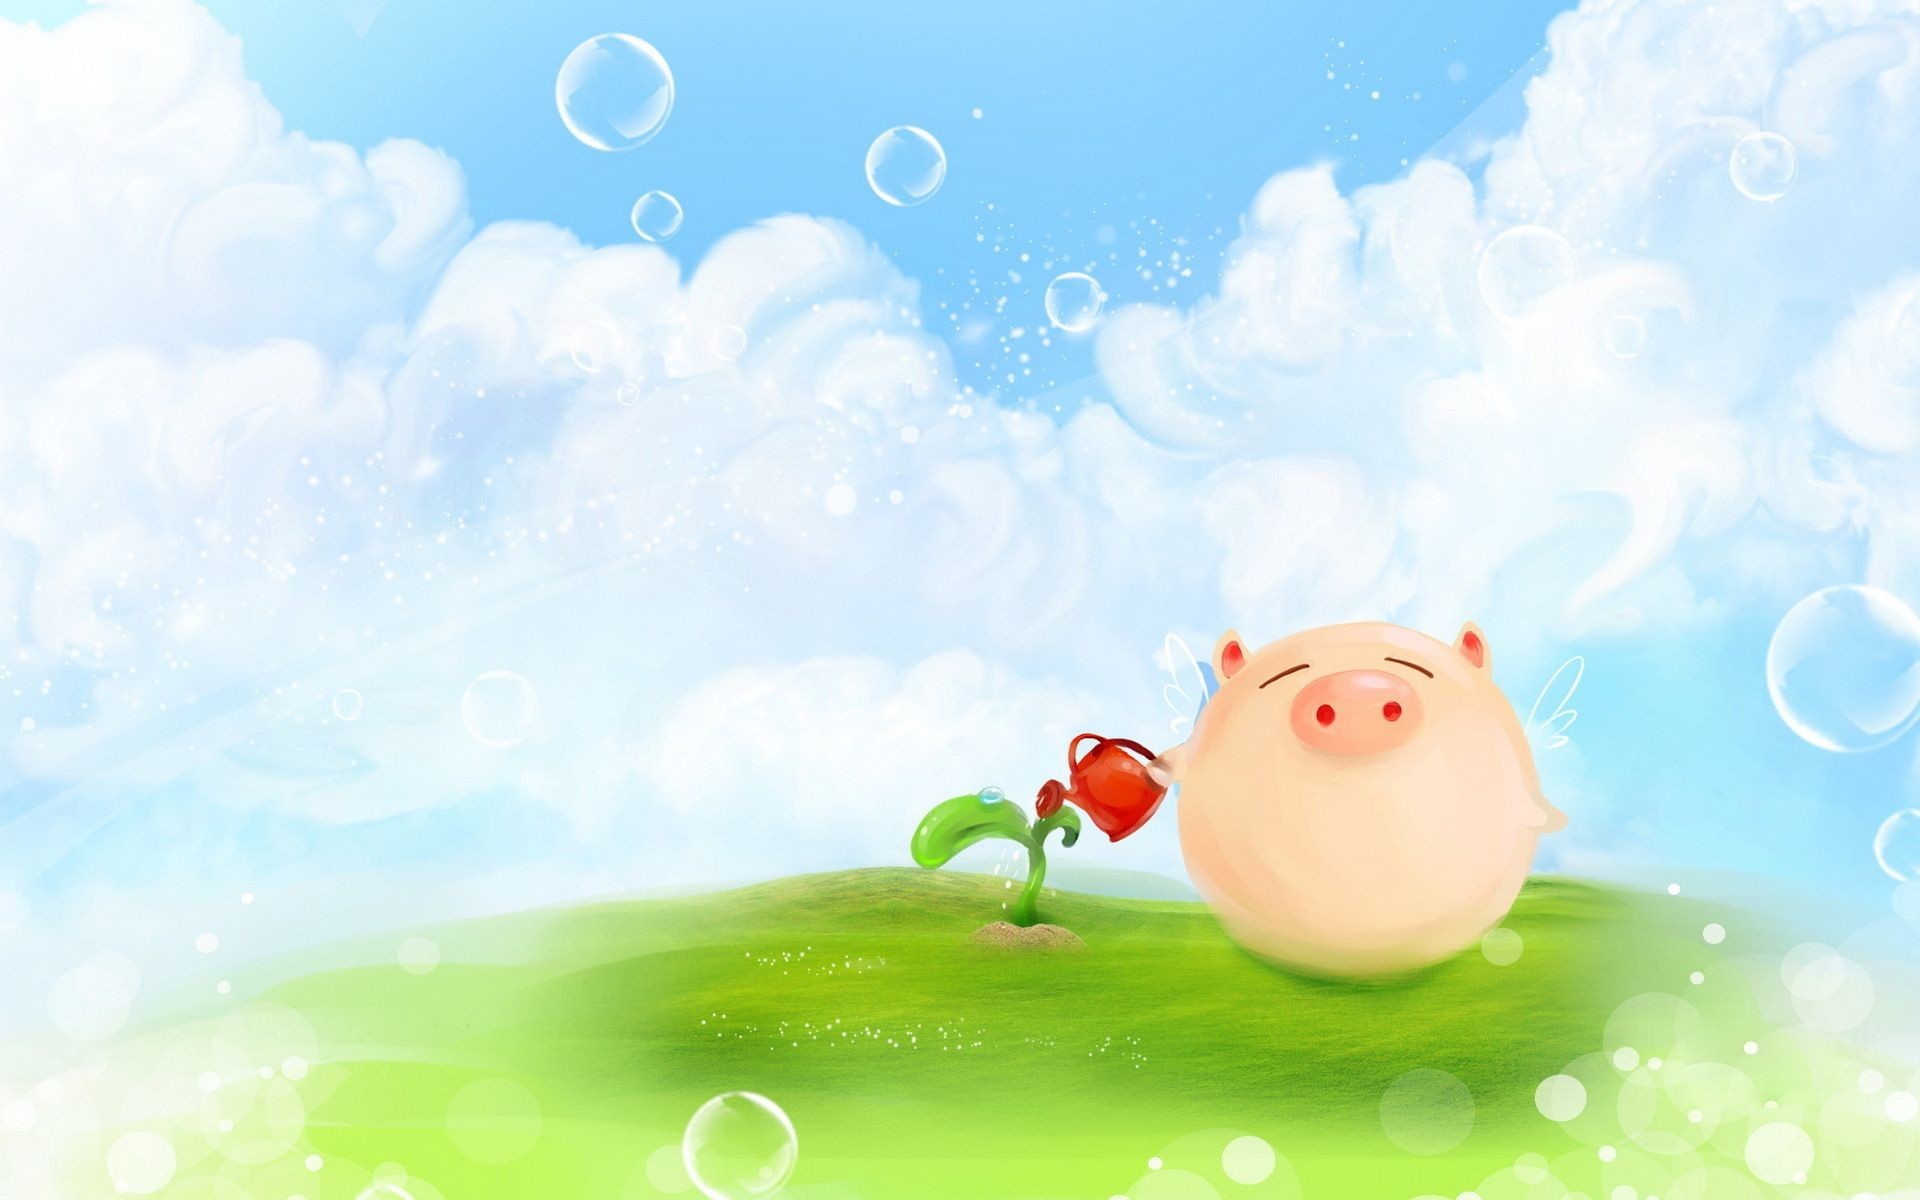 1920x1200 1970x1250 Shocking piglet modafinil pic for cute pig wallpaper iphone ideas  and trend